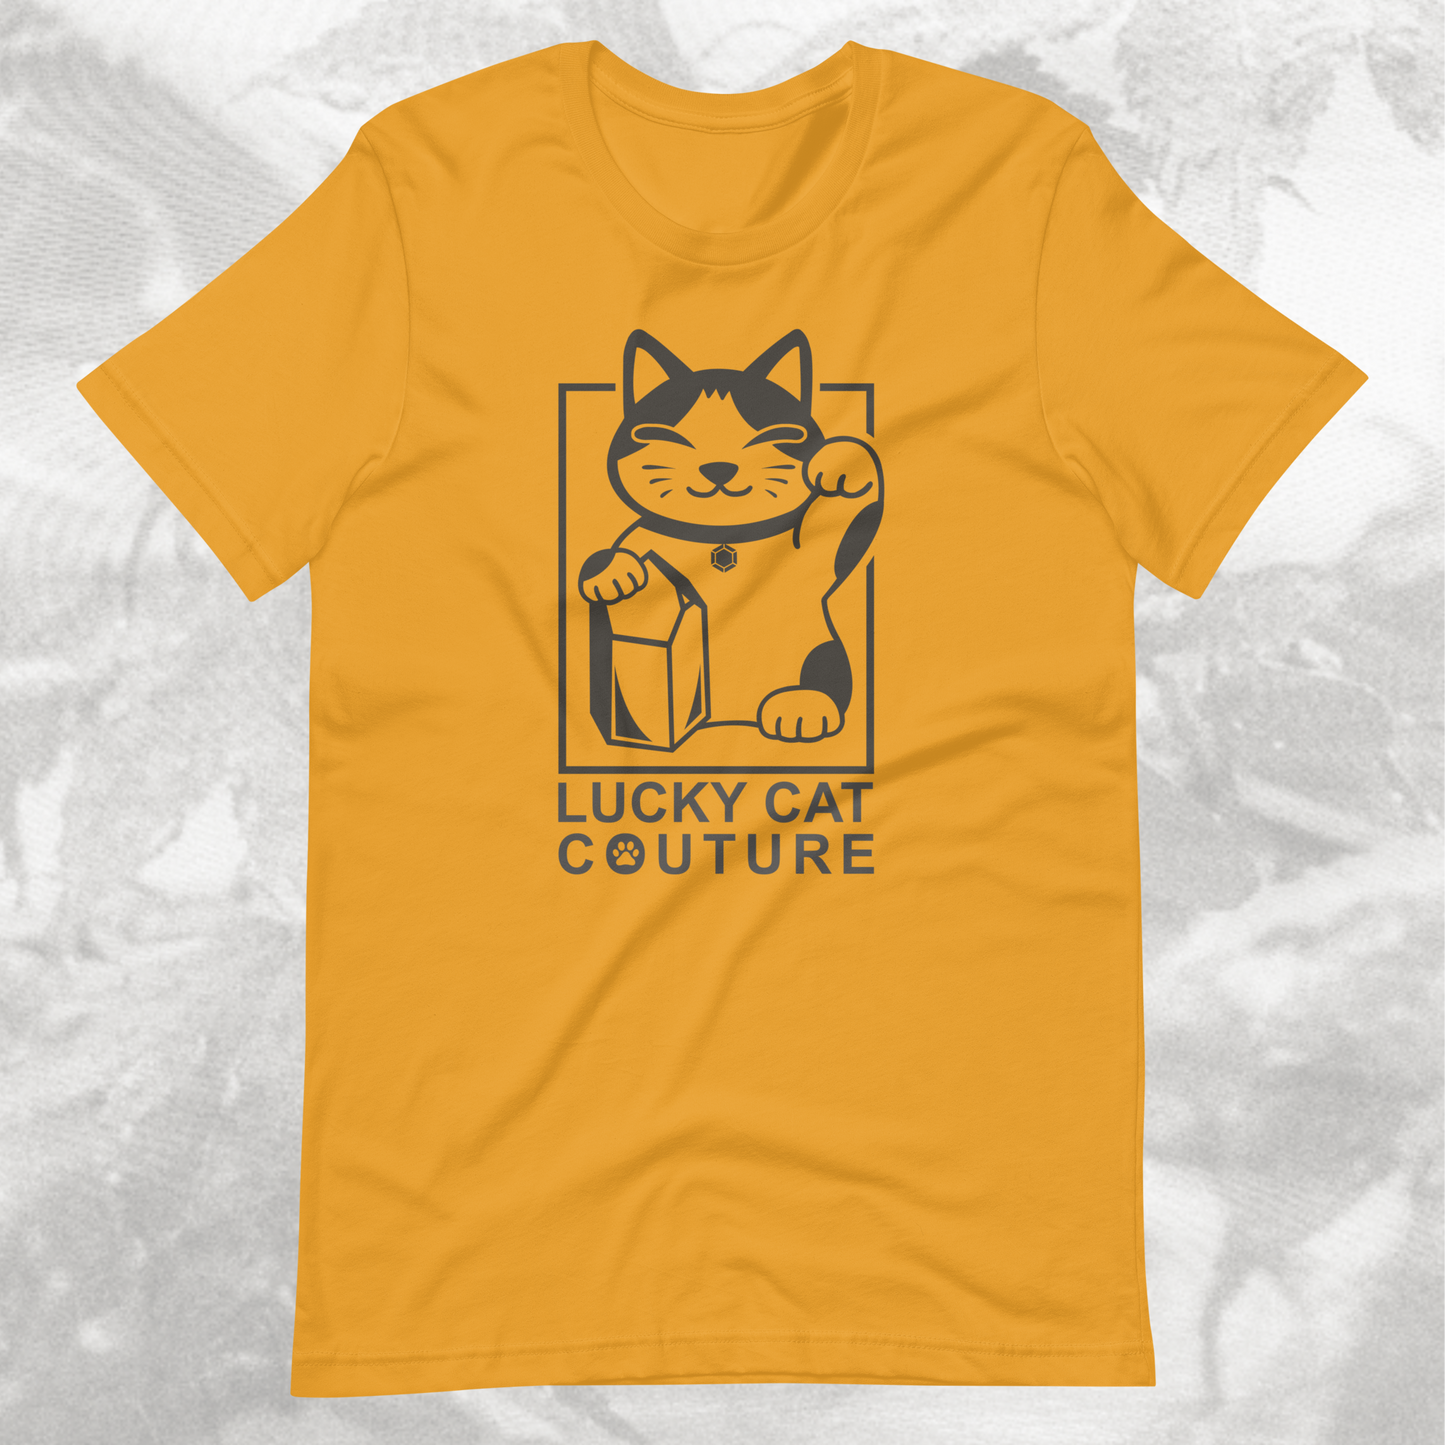 Deep Yellow Lucky Cat Couture Tee